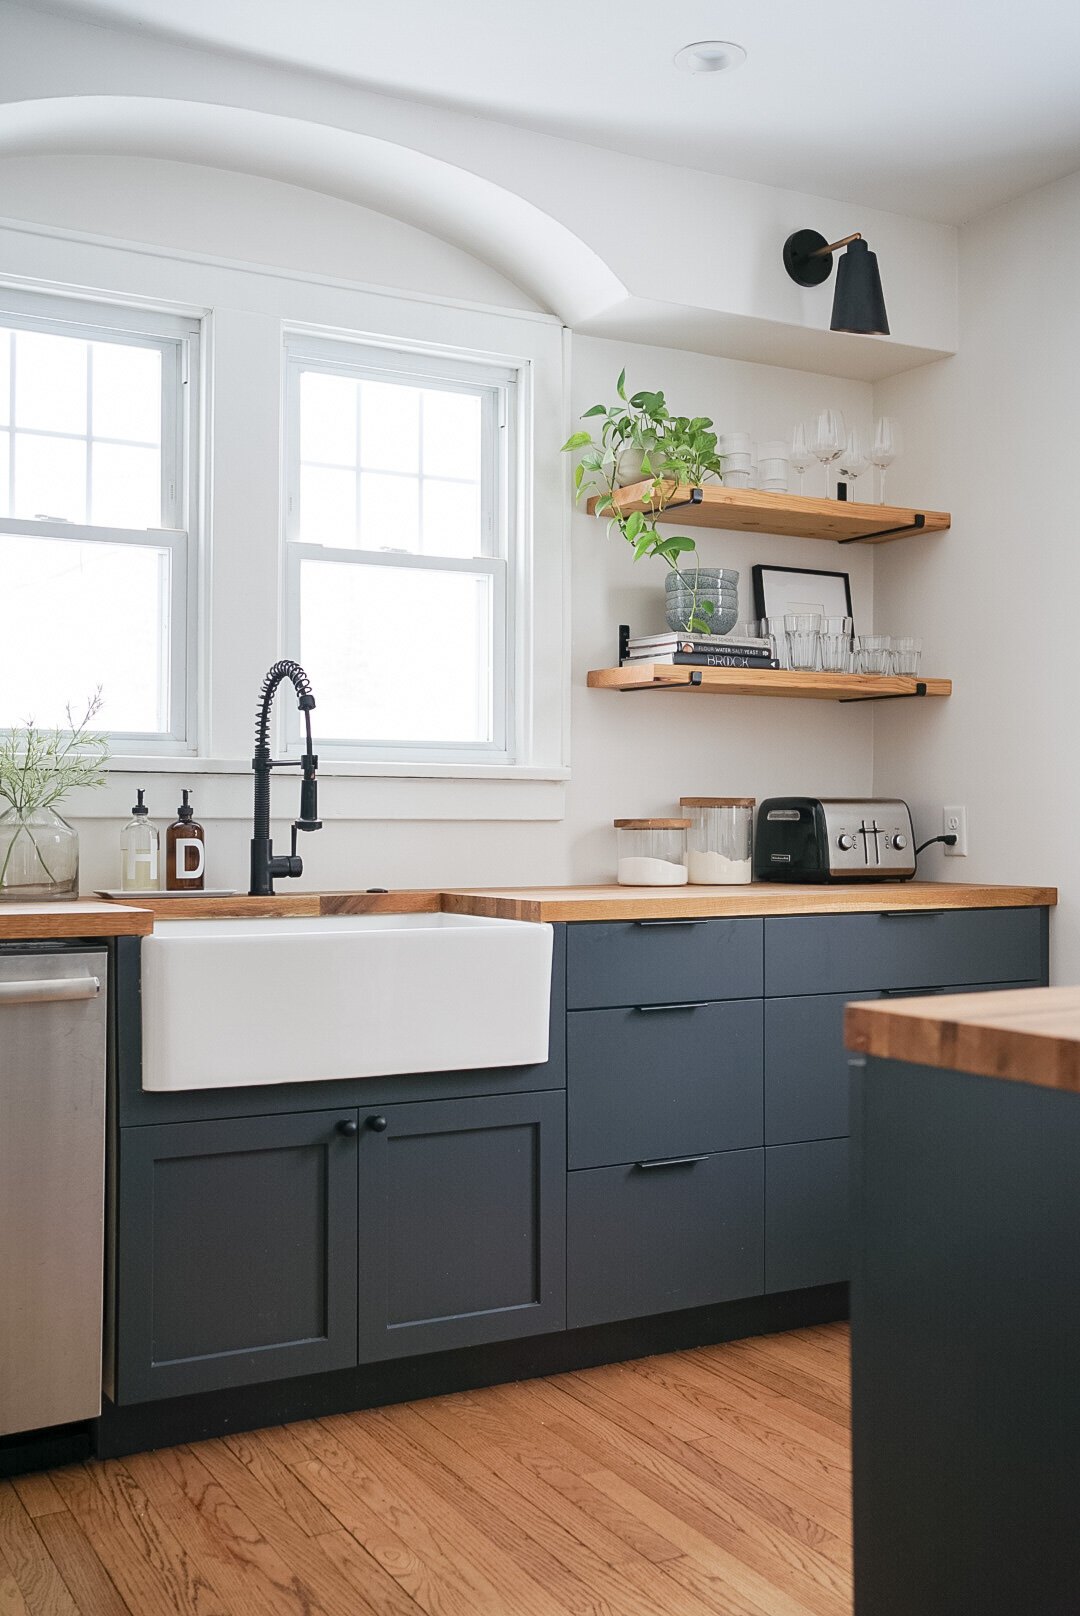 Upper Kitchen Cabinets or Open Shelves for Your Kitchen